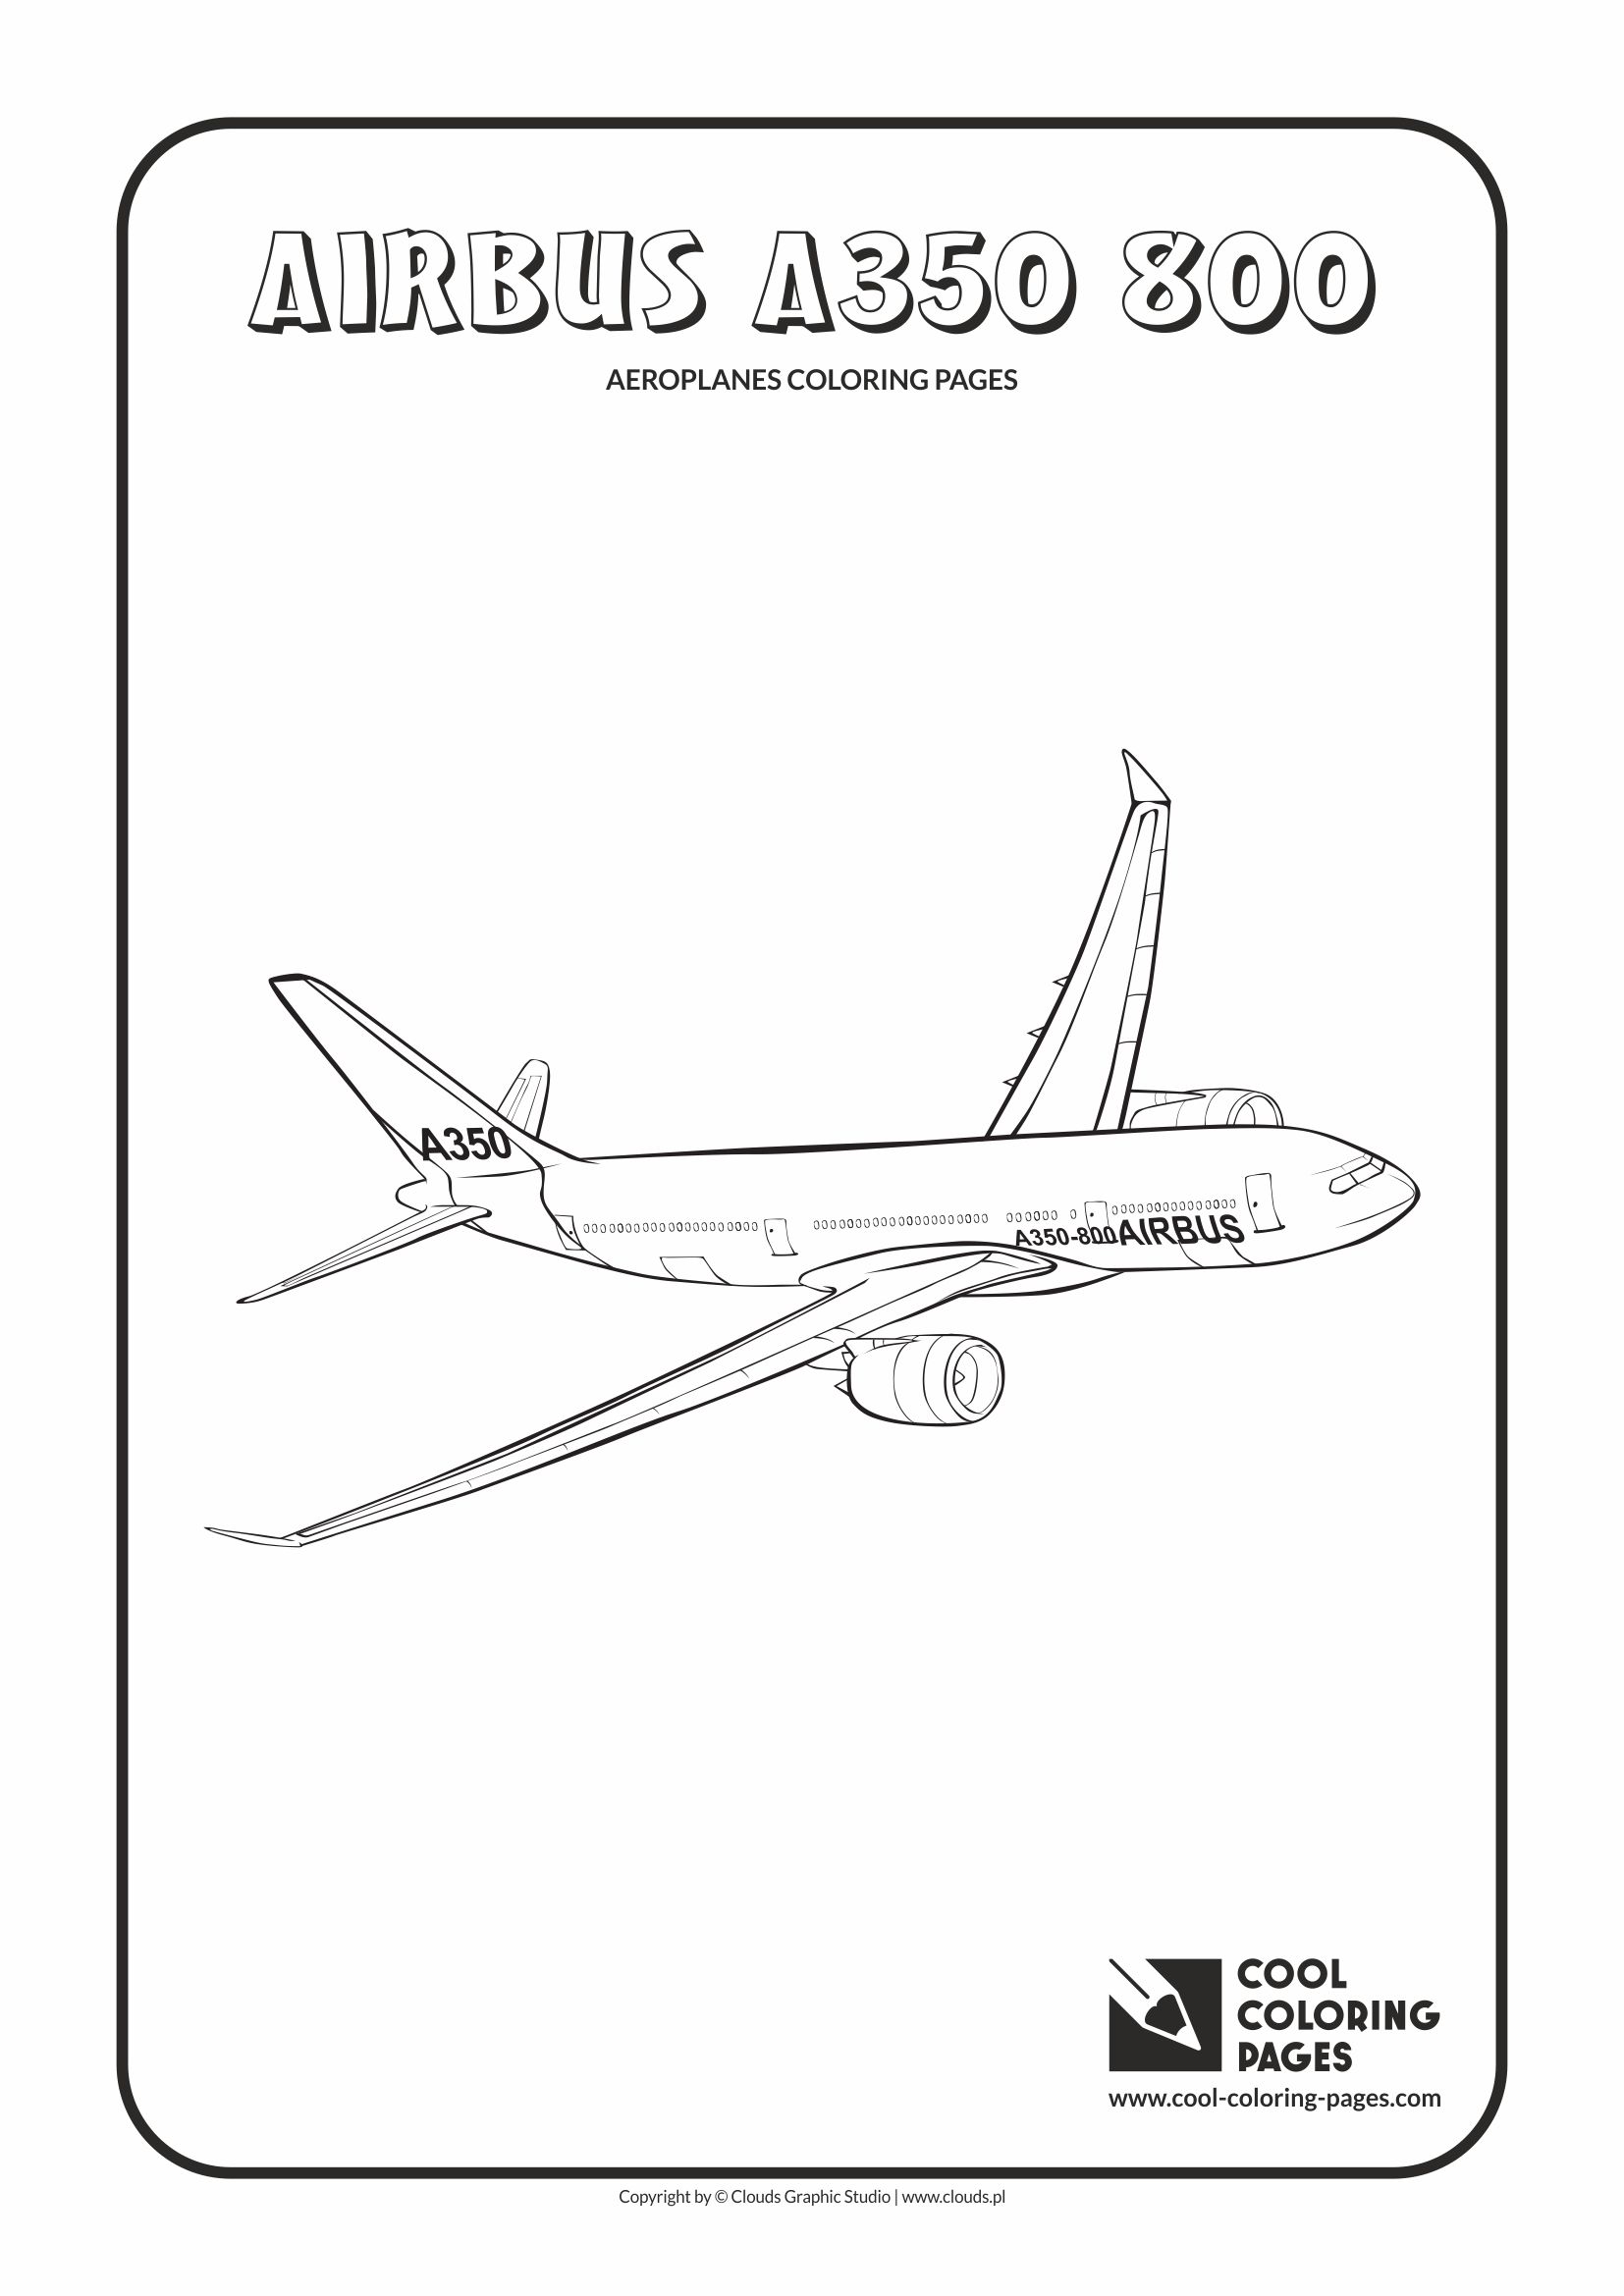 Cool Coloring Pages - Vehicles / Airbus A350 800 / Coloring page with Airbus A350 800